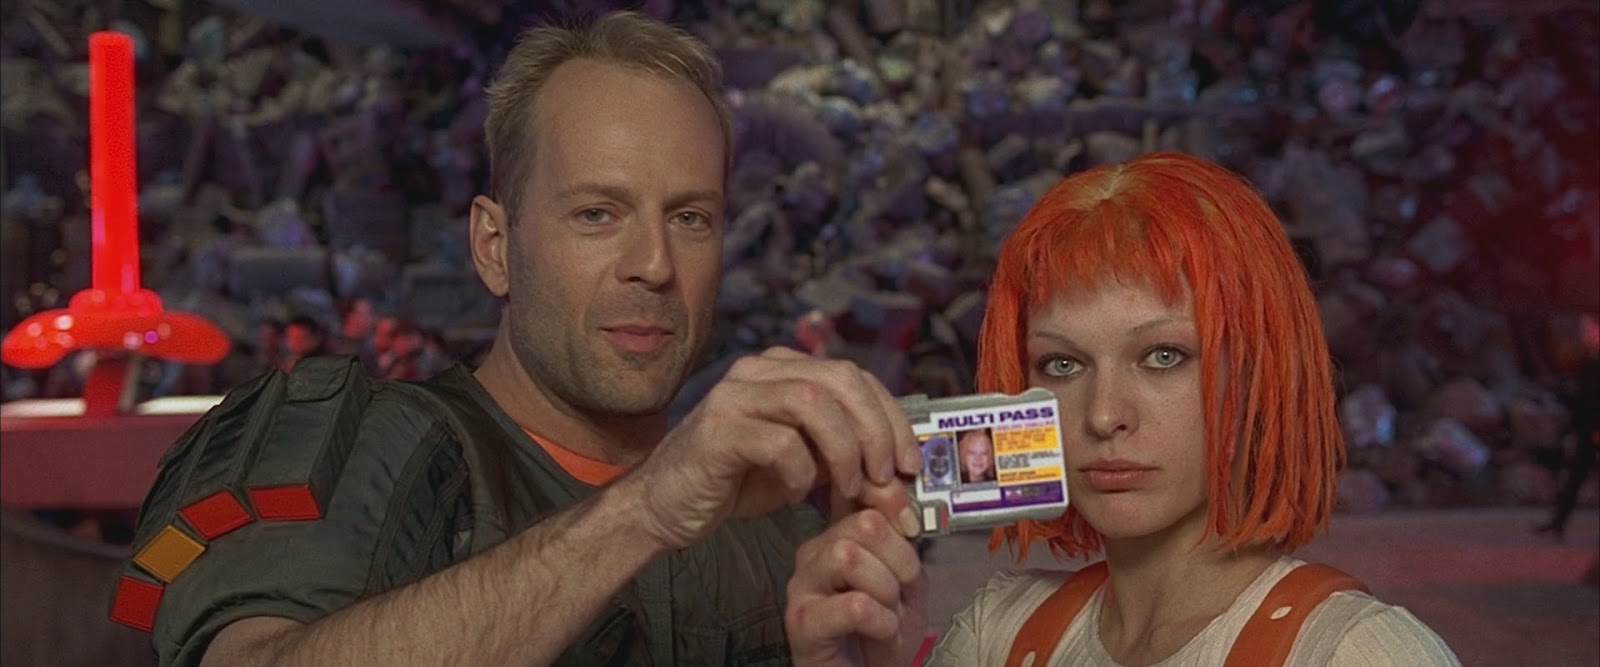 the fifth element full movie online free